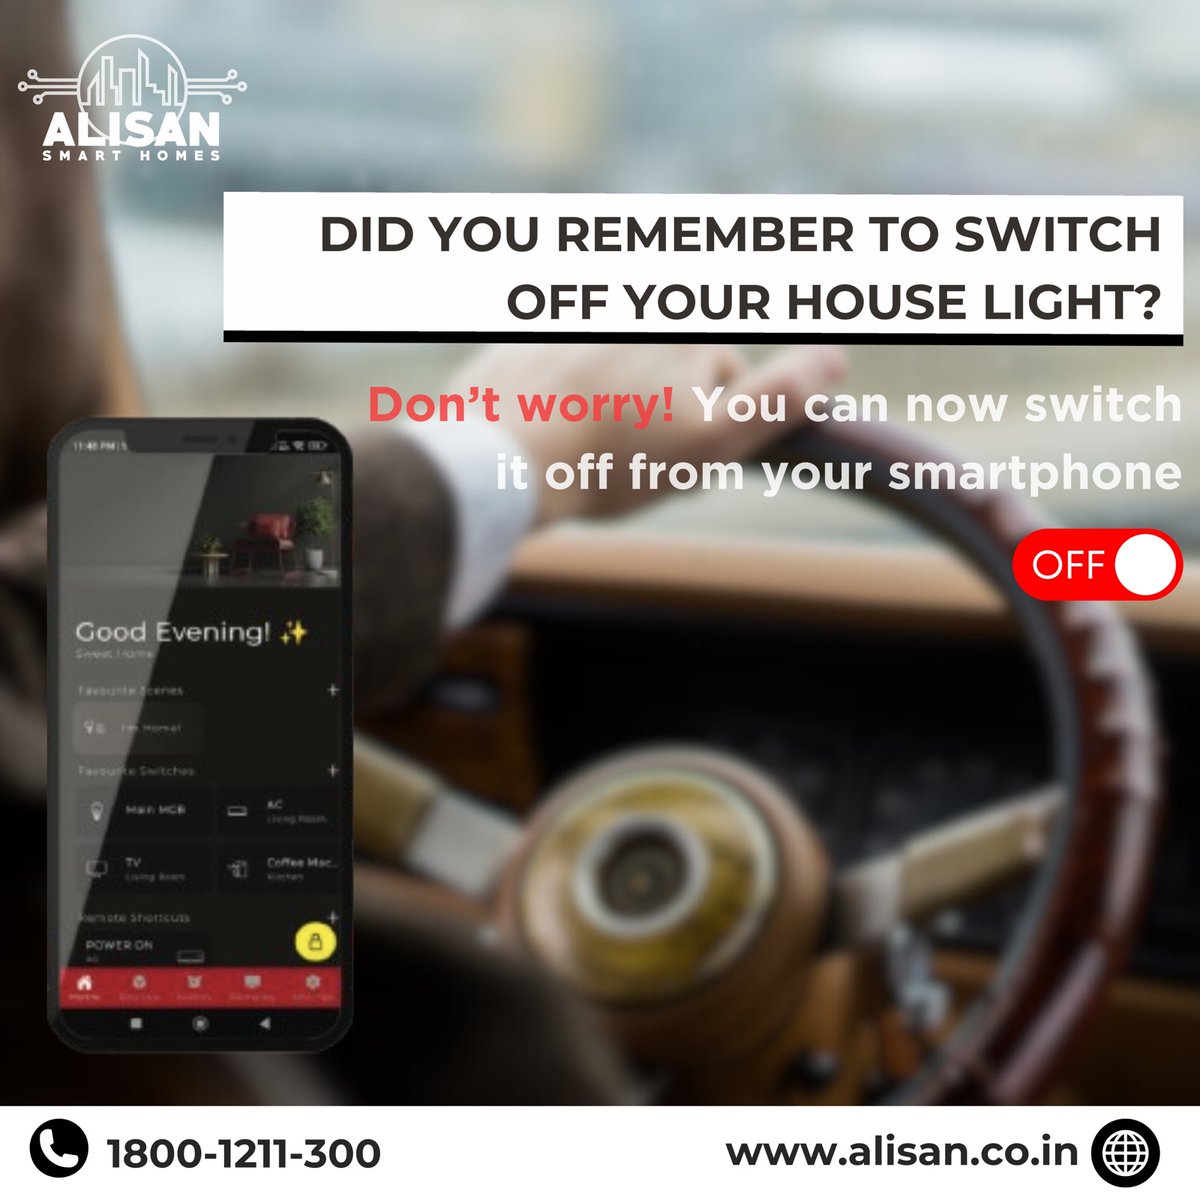 Welcome to the future of home living with Alisan Smart Homes Automation! 🏡✨ Control your home from anywhere, anytime, right from your phone. AlisanSmartHomes #HomeAutomation #SmartLiving #ControlFromAnywhere #ConvenienceAtYourFingertips #PeaceOfMind #ConnectedHome